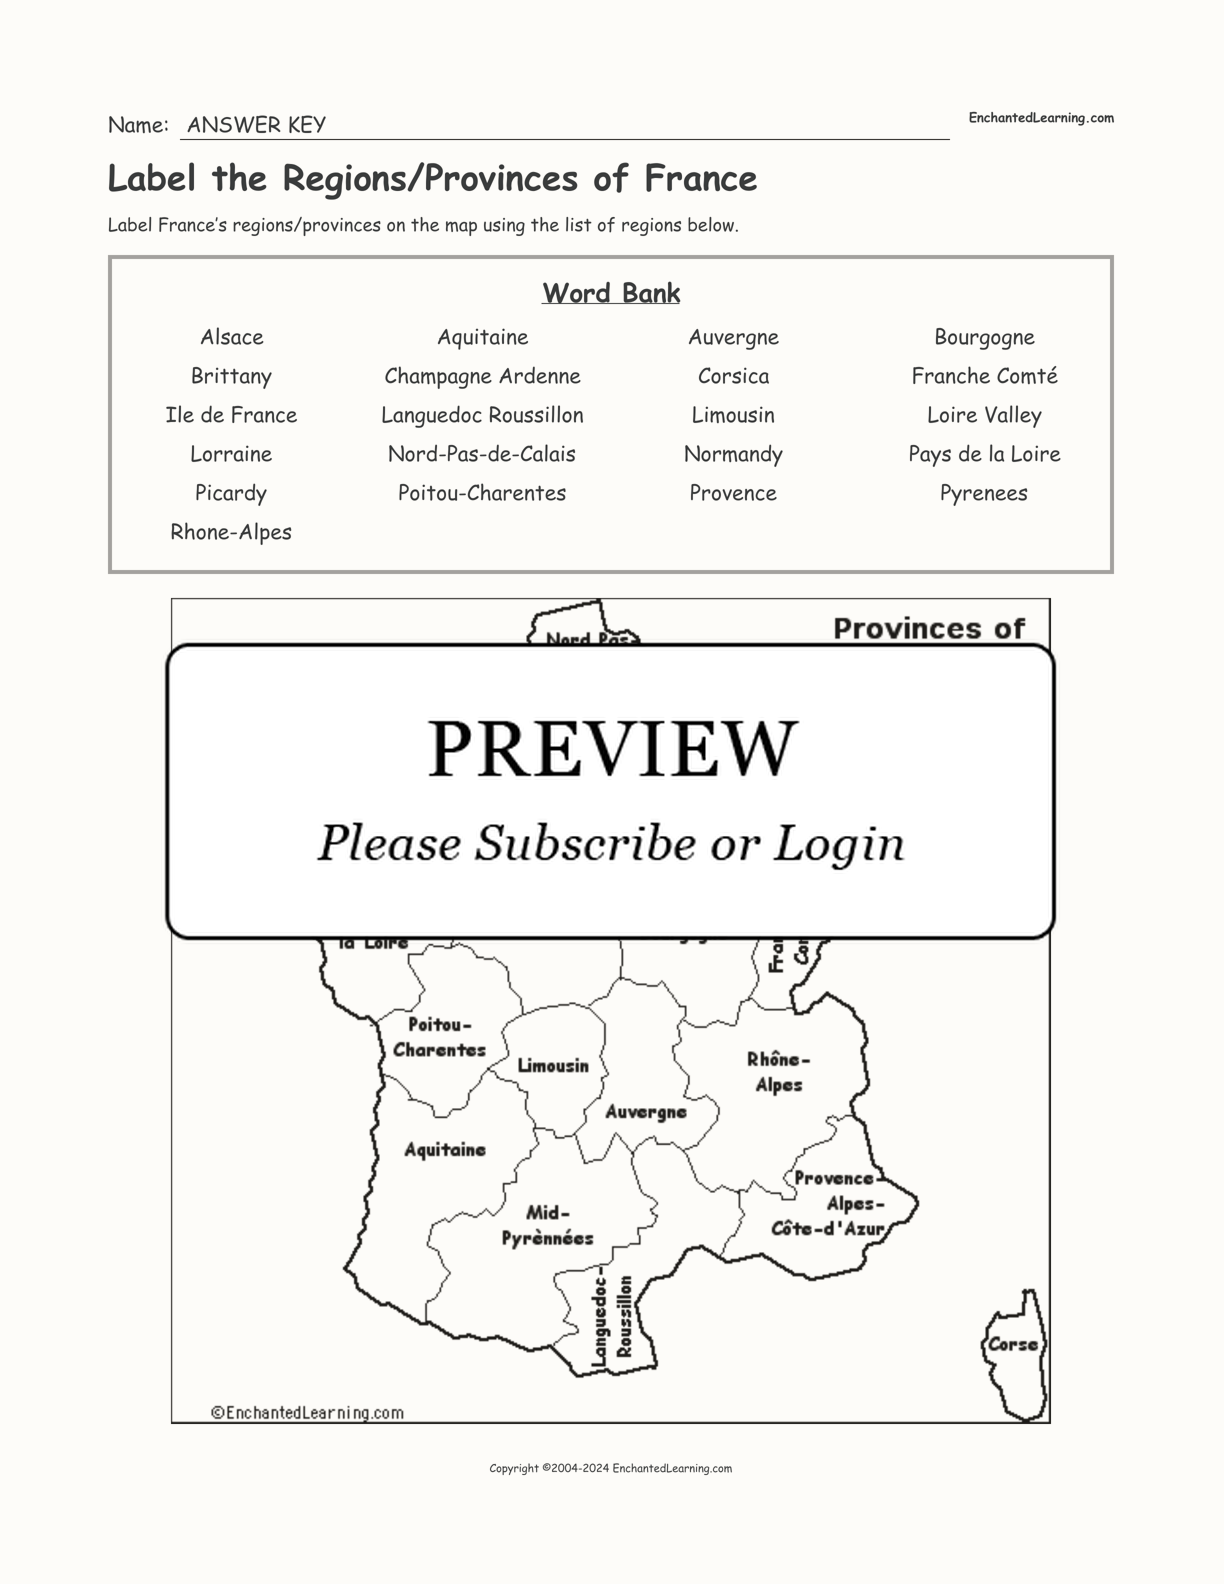 Label the Regions/Provinces of France - Enchanted Learning